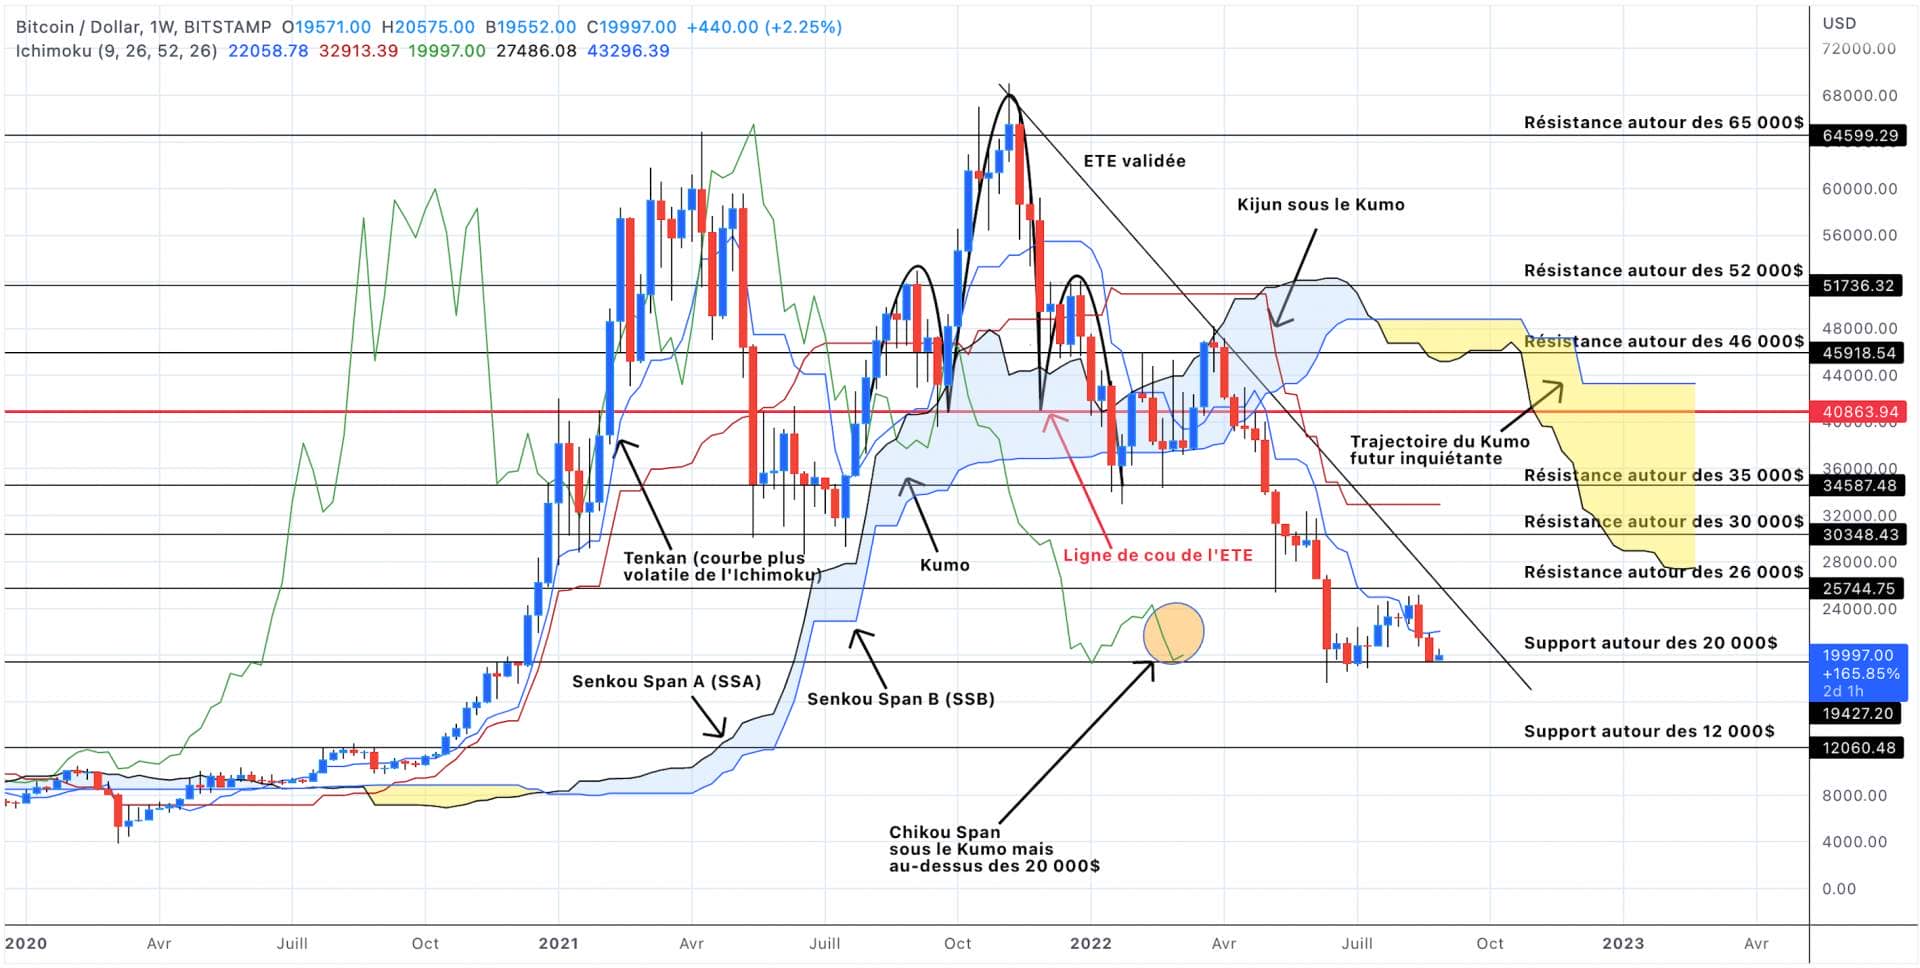 Bitcoin price analysis in weekly units - September 03, 2022